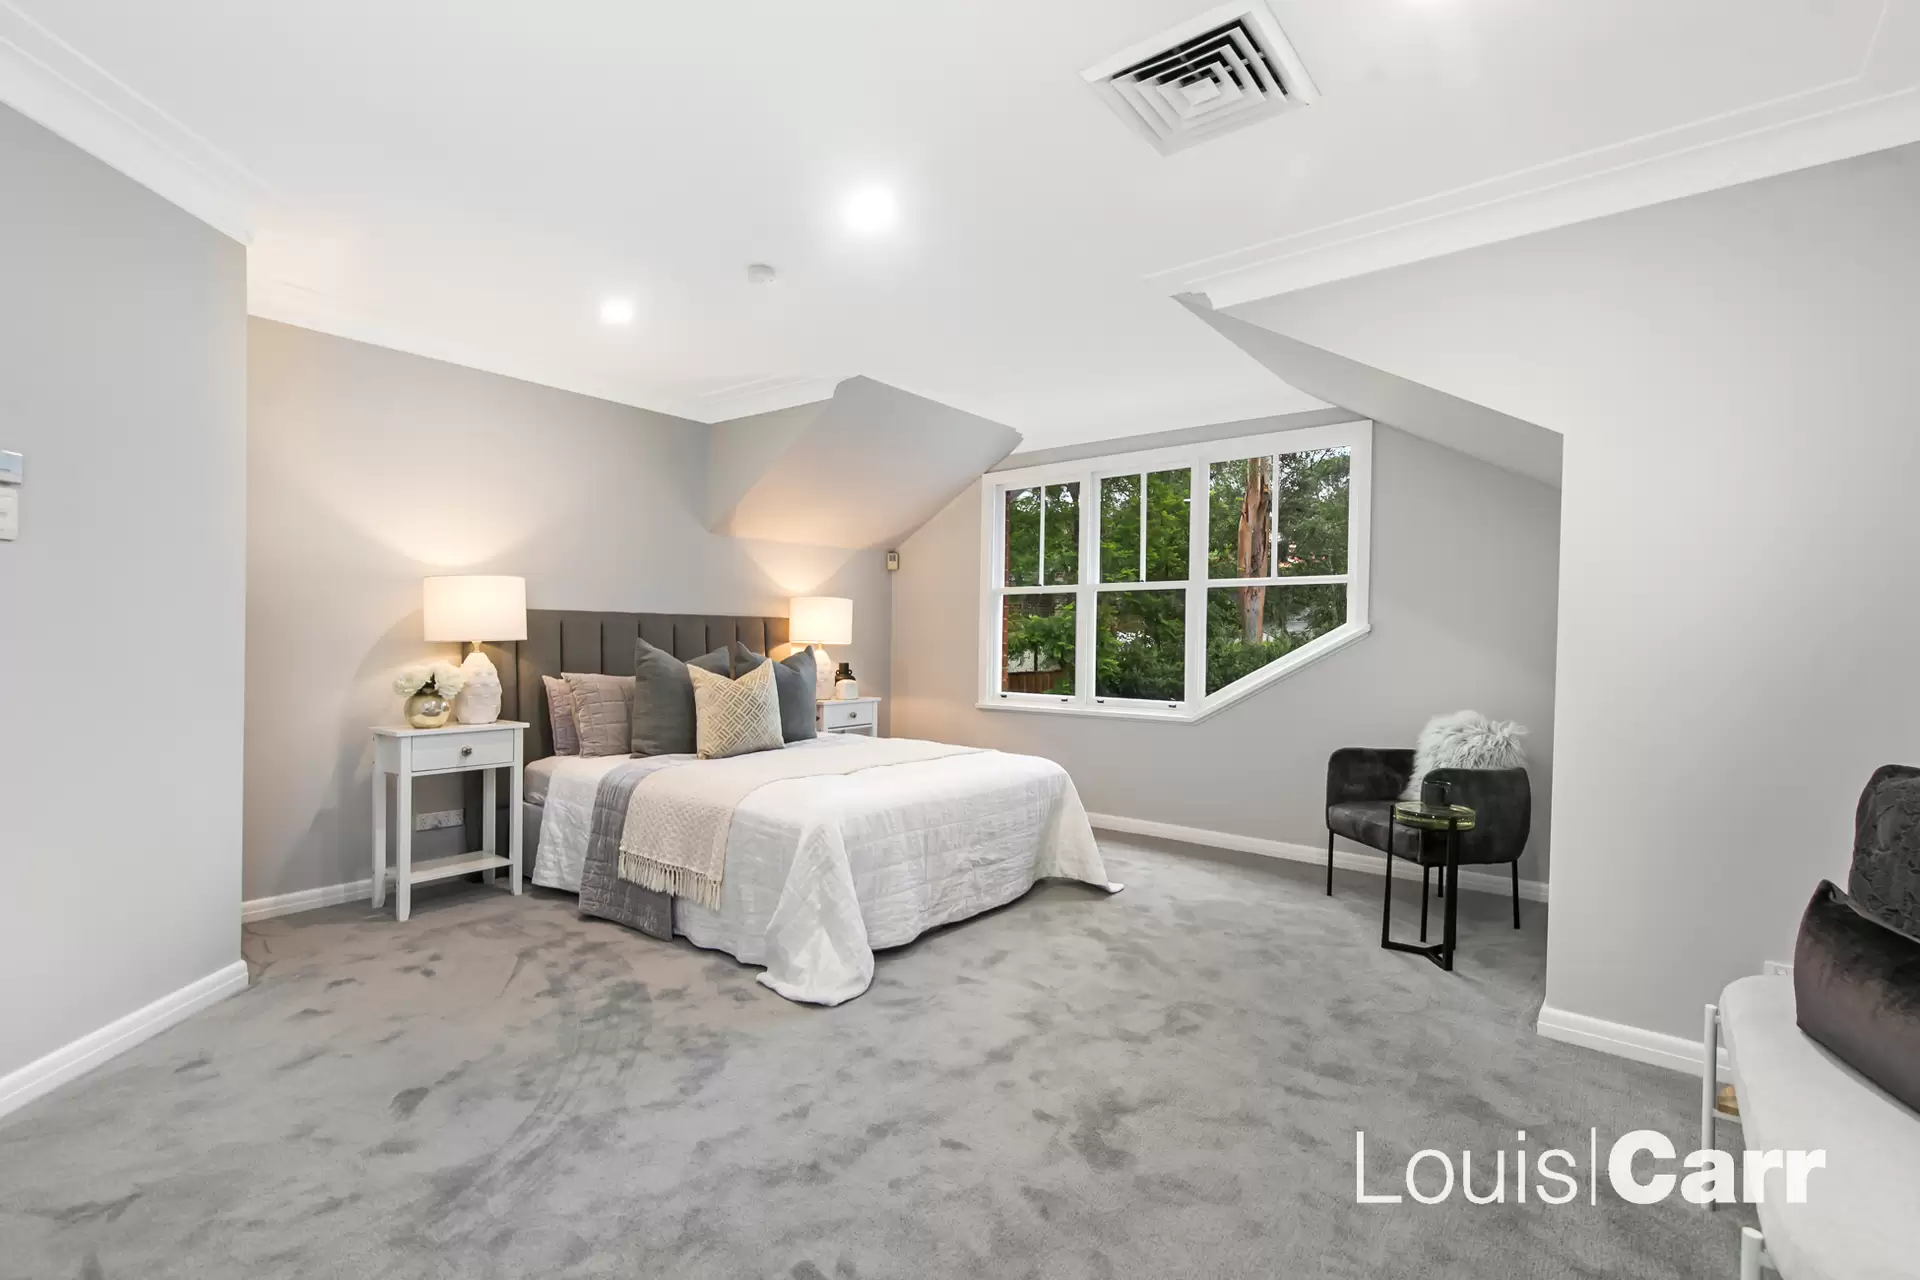 Photo #8: 22 Willowleaf Place, West Pennant Hills - For Sale by Louis Carr Real Estate